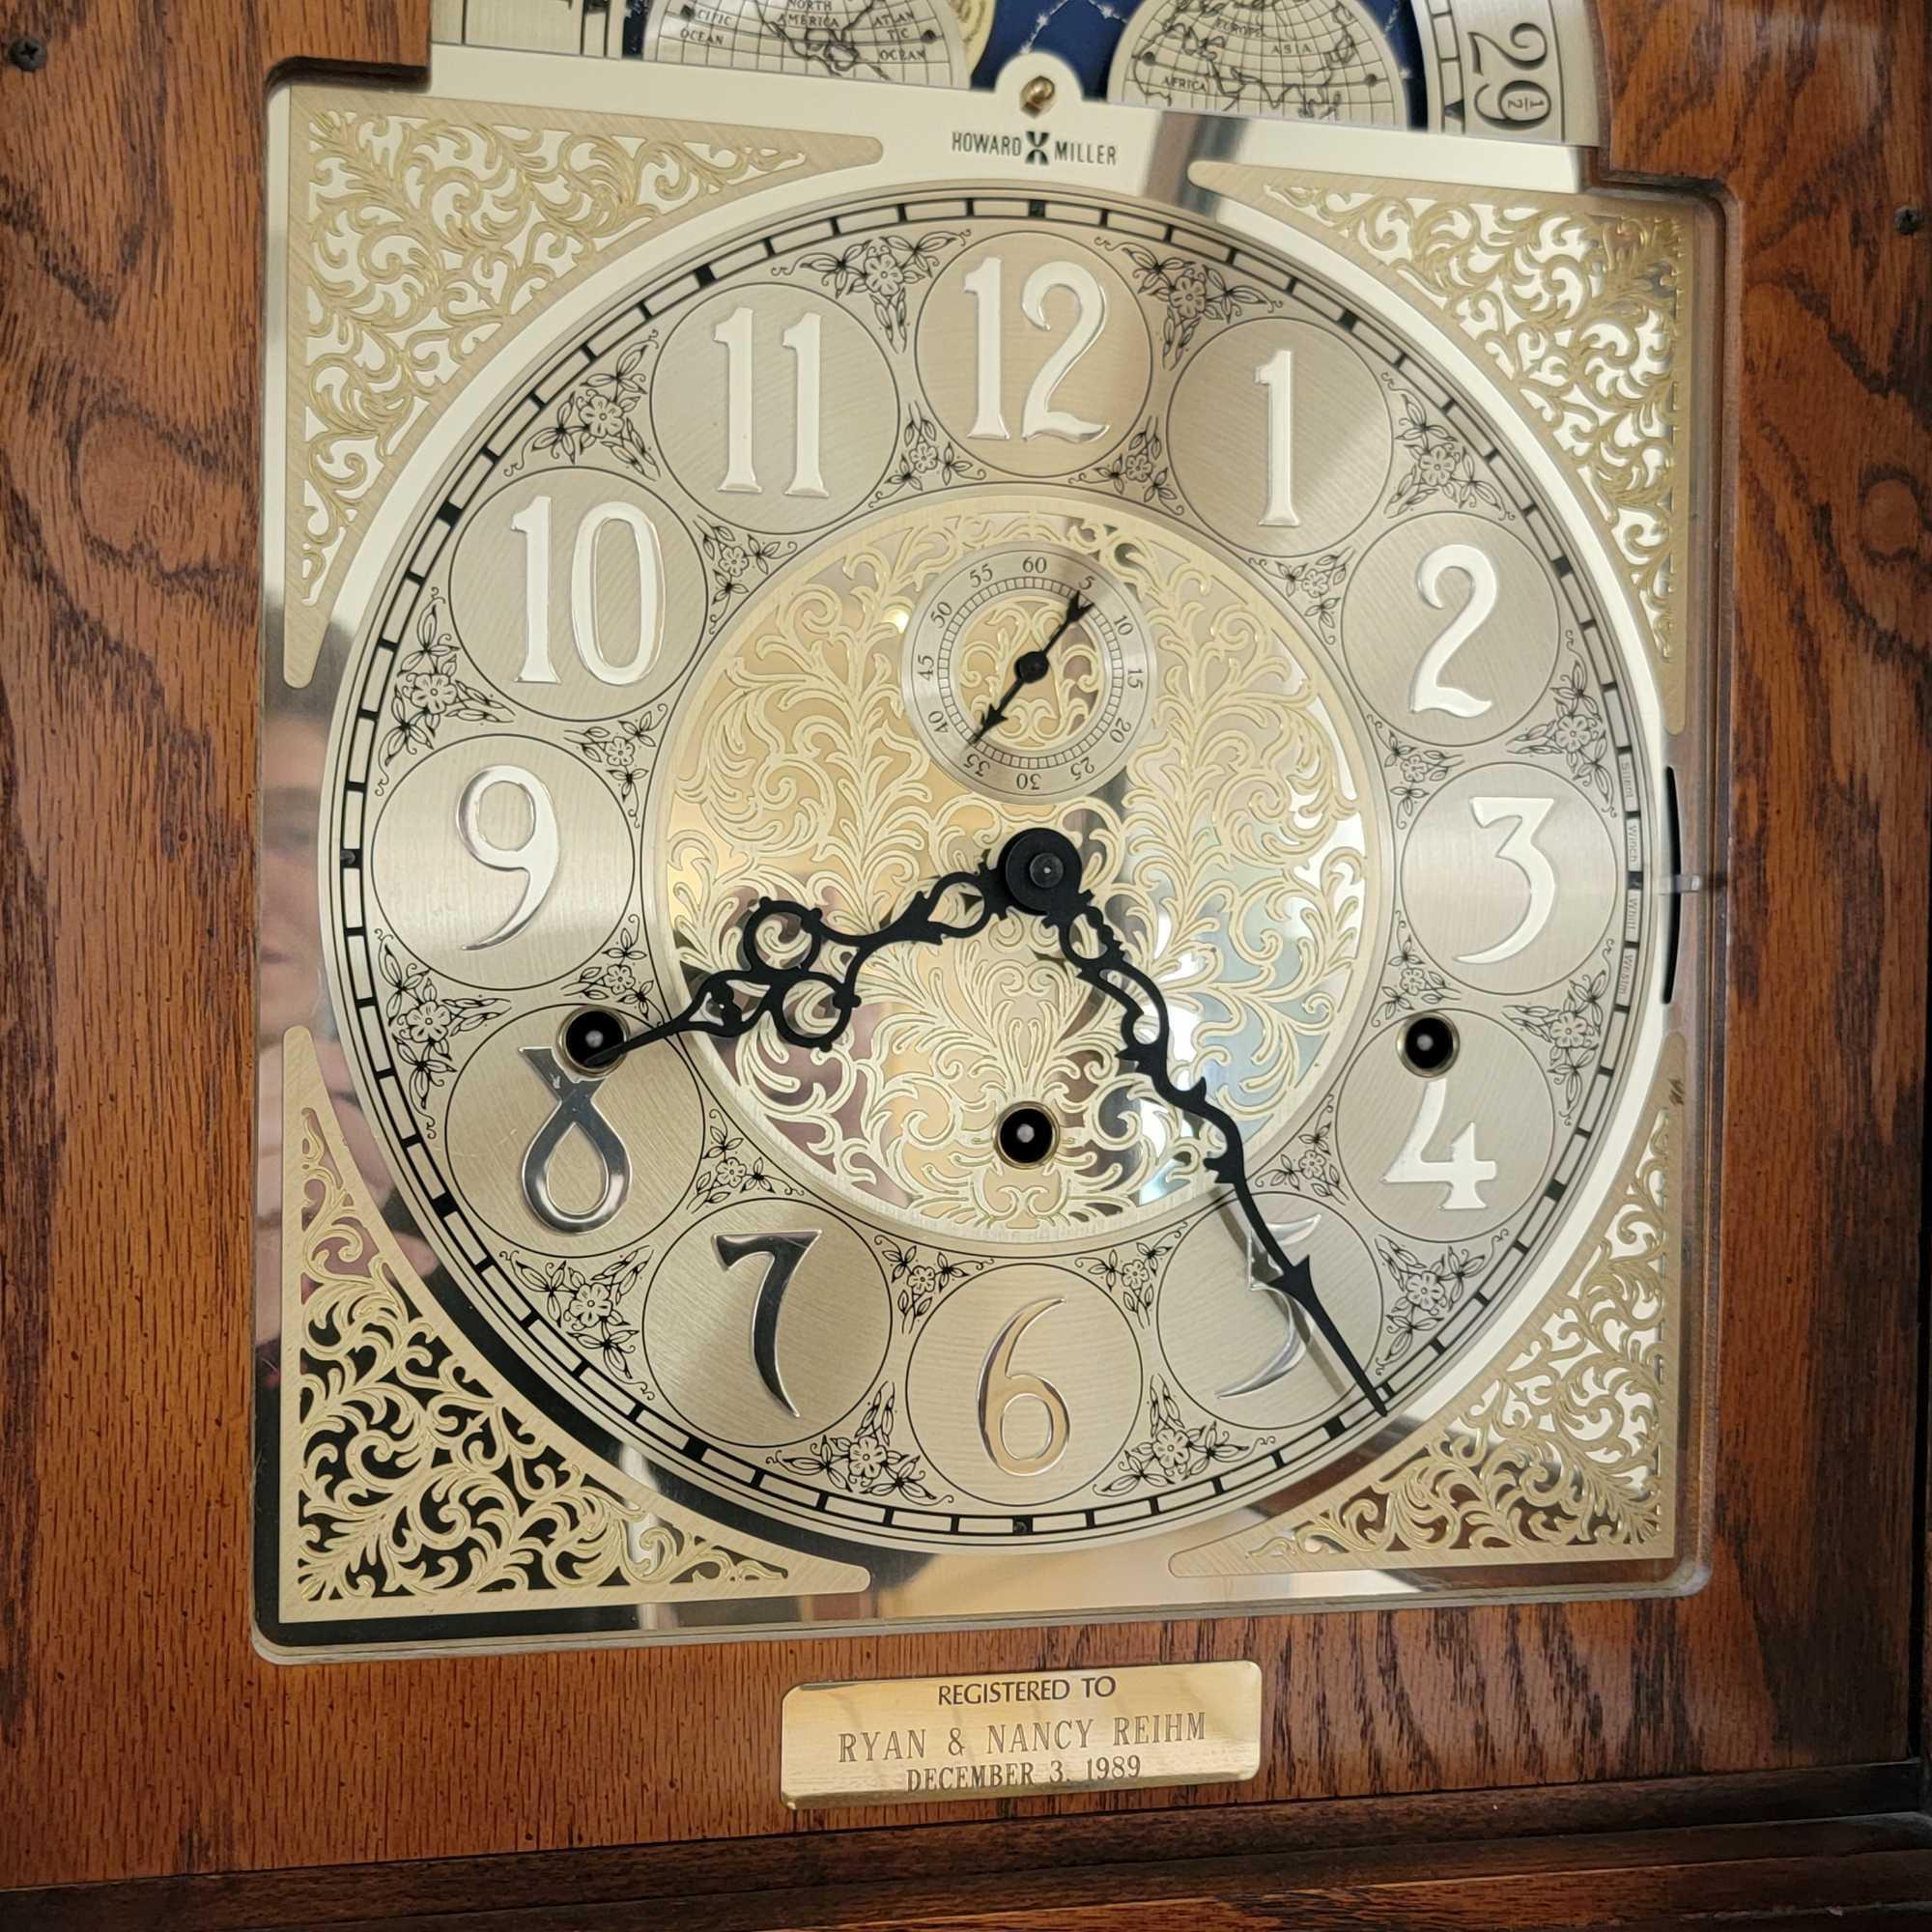 7ft Howard Miller Grandfather Clock with Chimes Pendulum